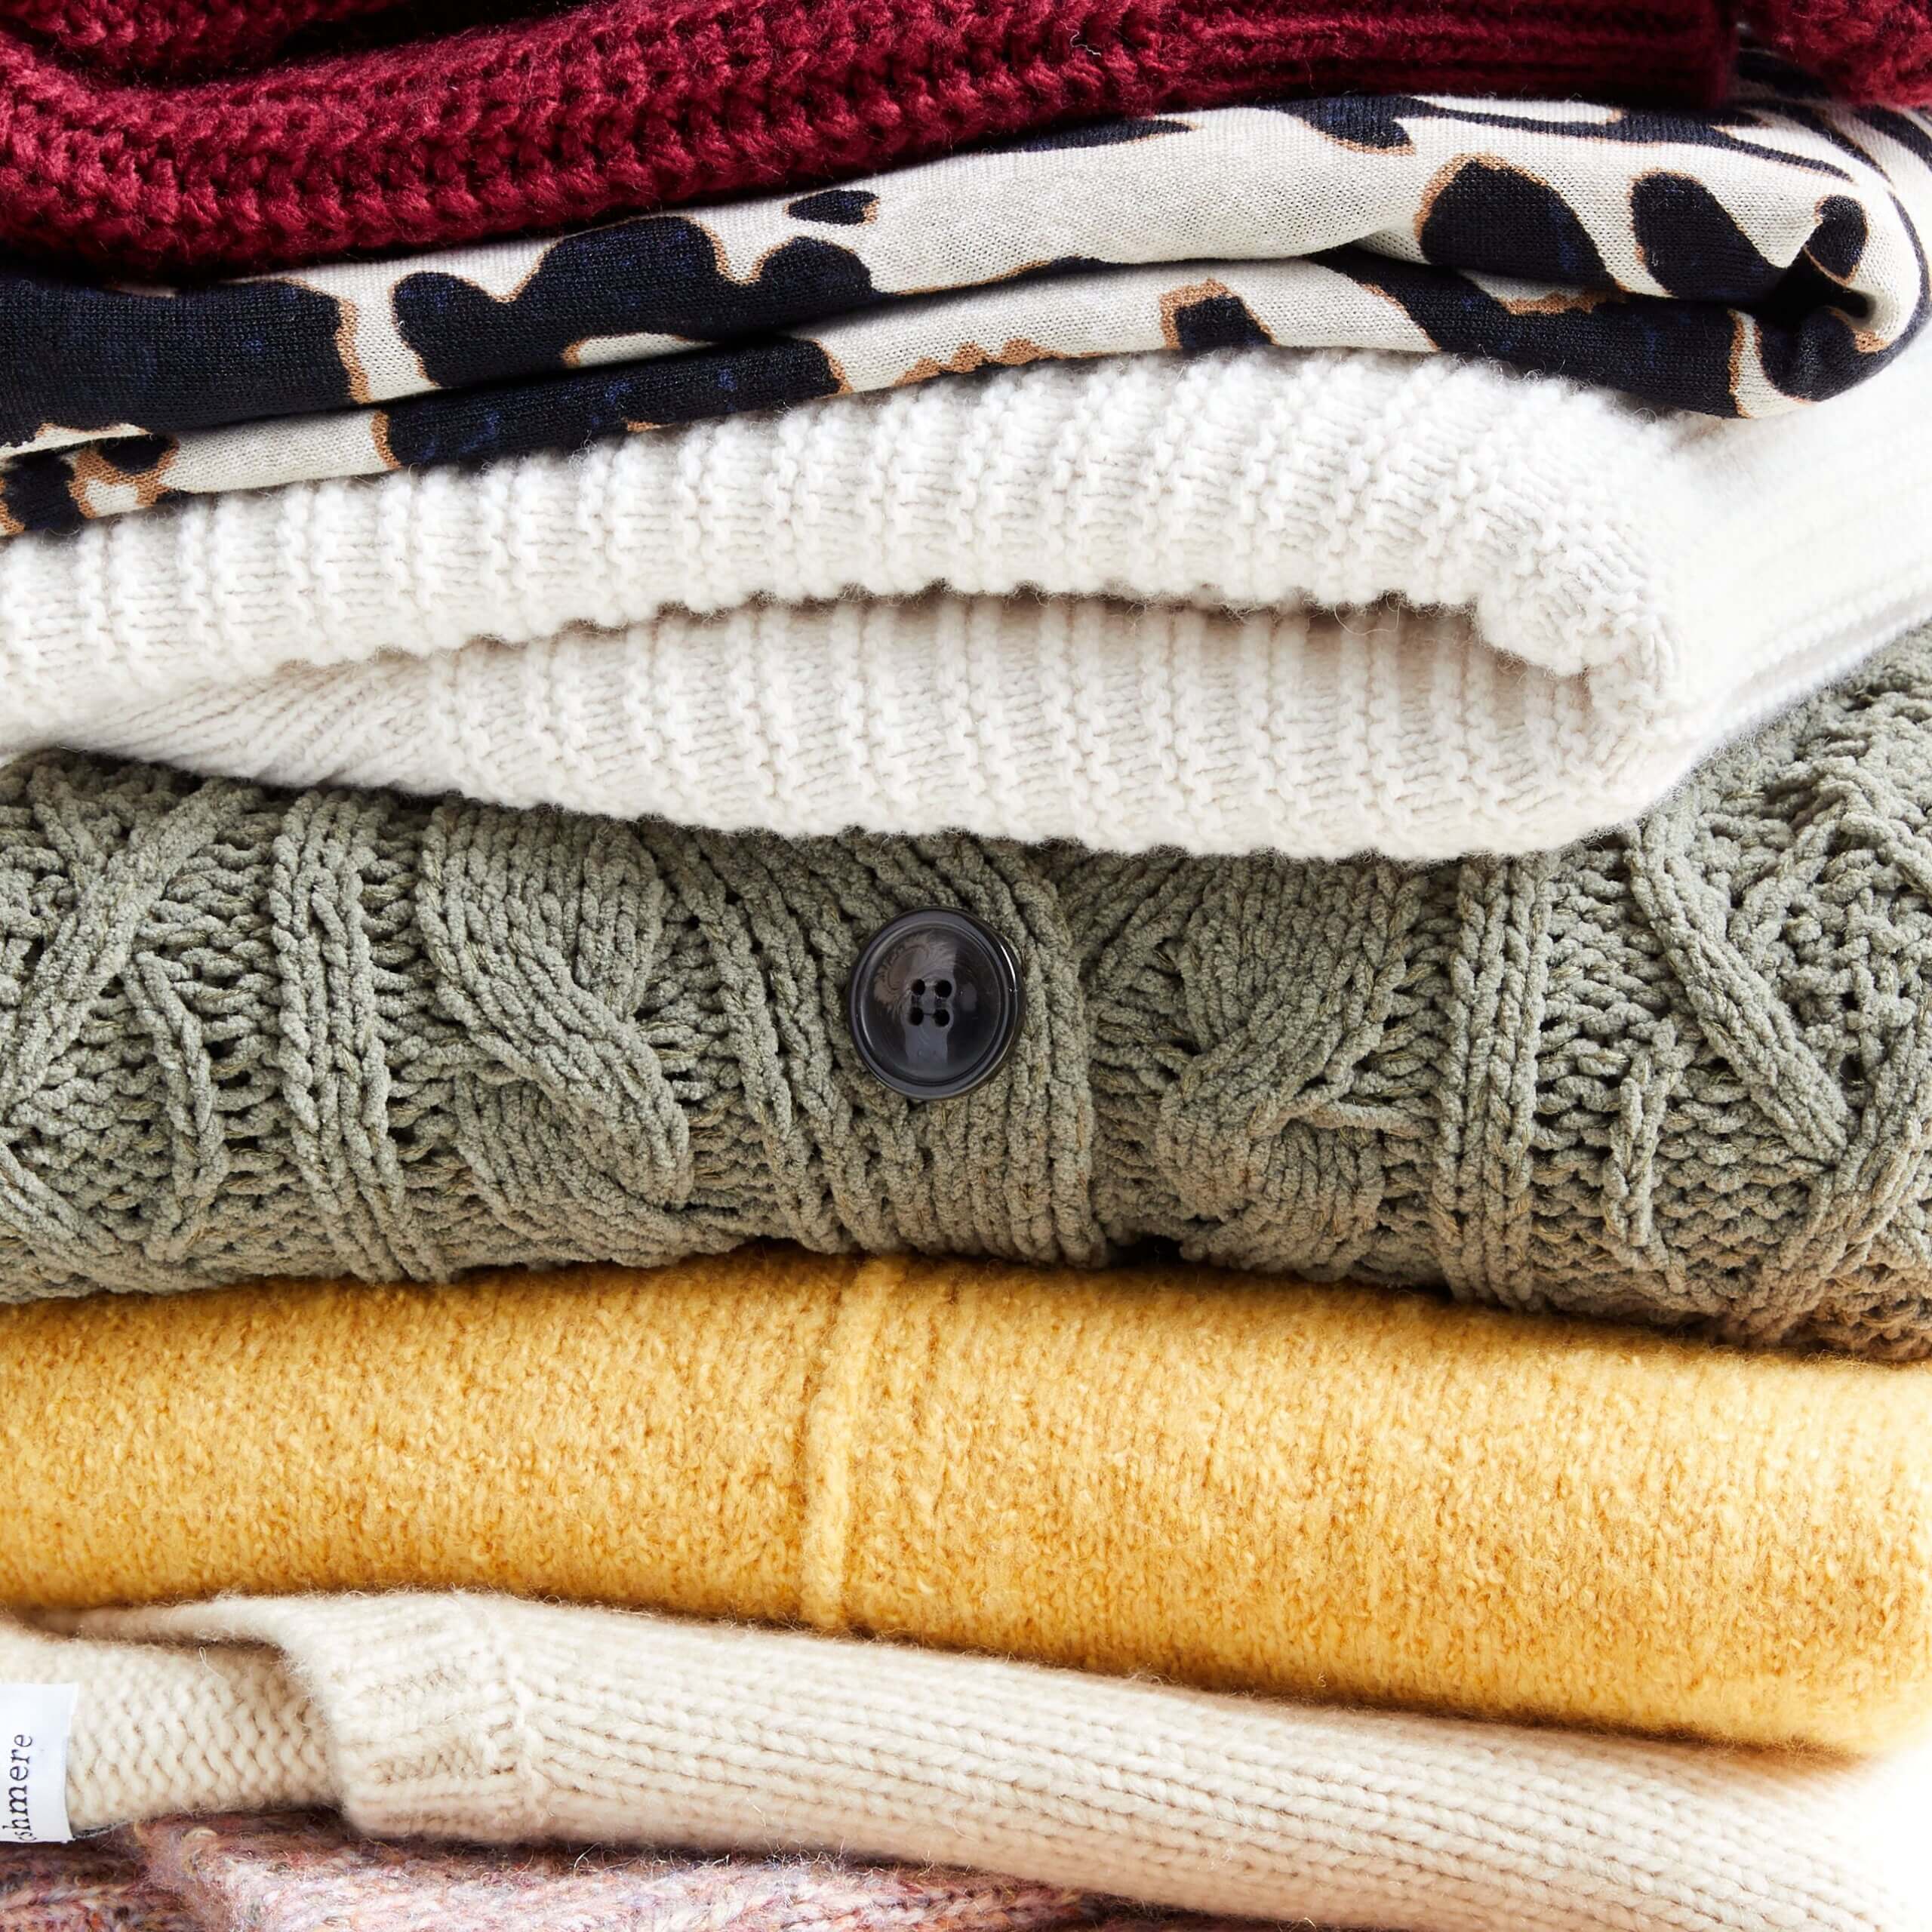 How to wash sweaters: Prevent shrinking and retain shape